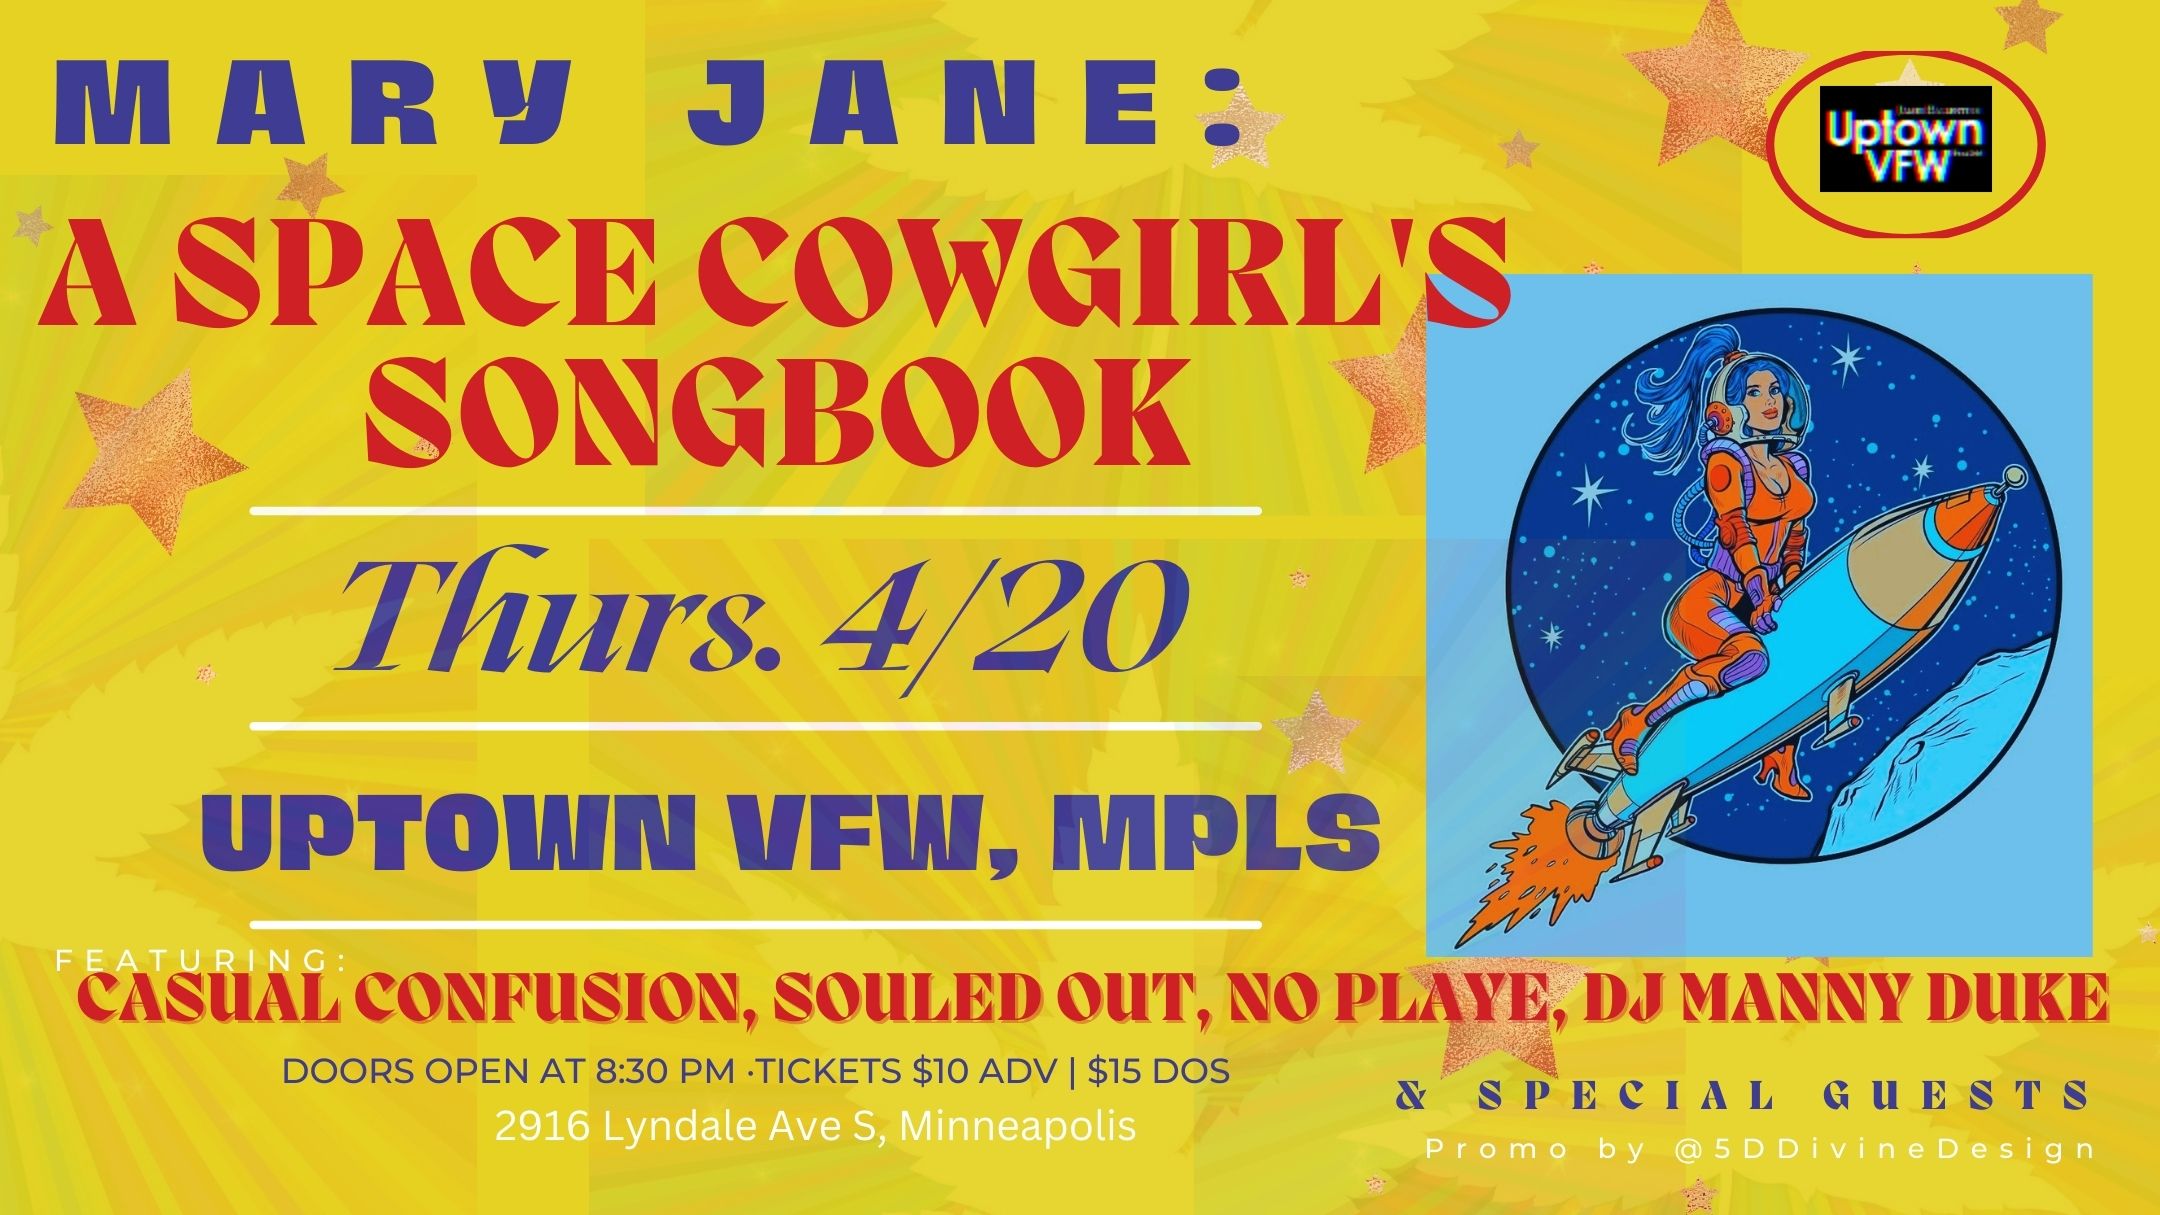 Mary Jane: A Space Cowgirl's Songbook Featuring: Casual Confusion Souled Out No Playe DJ Manny Duke Thursday, April 20 James Ballentine "Uptown" VFW Post 246 Doors 8:30pm :: Music 8:30pm :: 21+ GA $10 ADV / $15 DOS NO REFUNDS A VFW 4/20 Show!